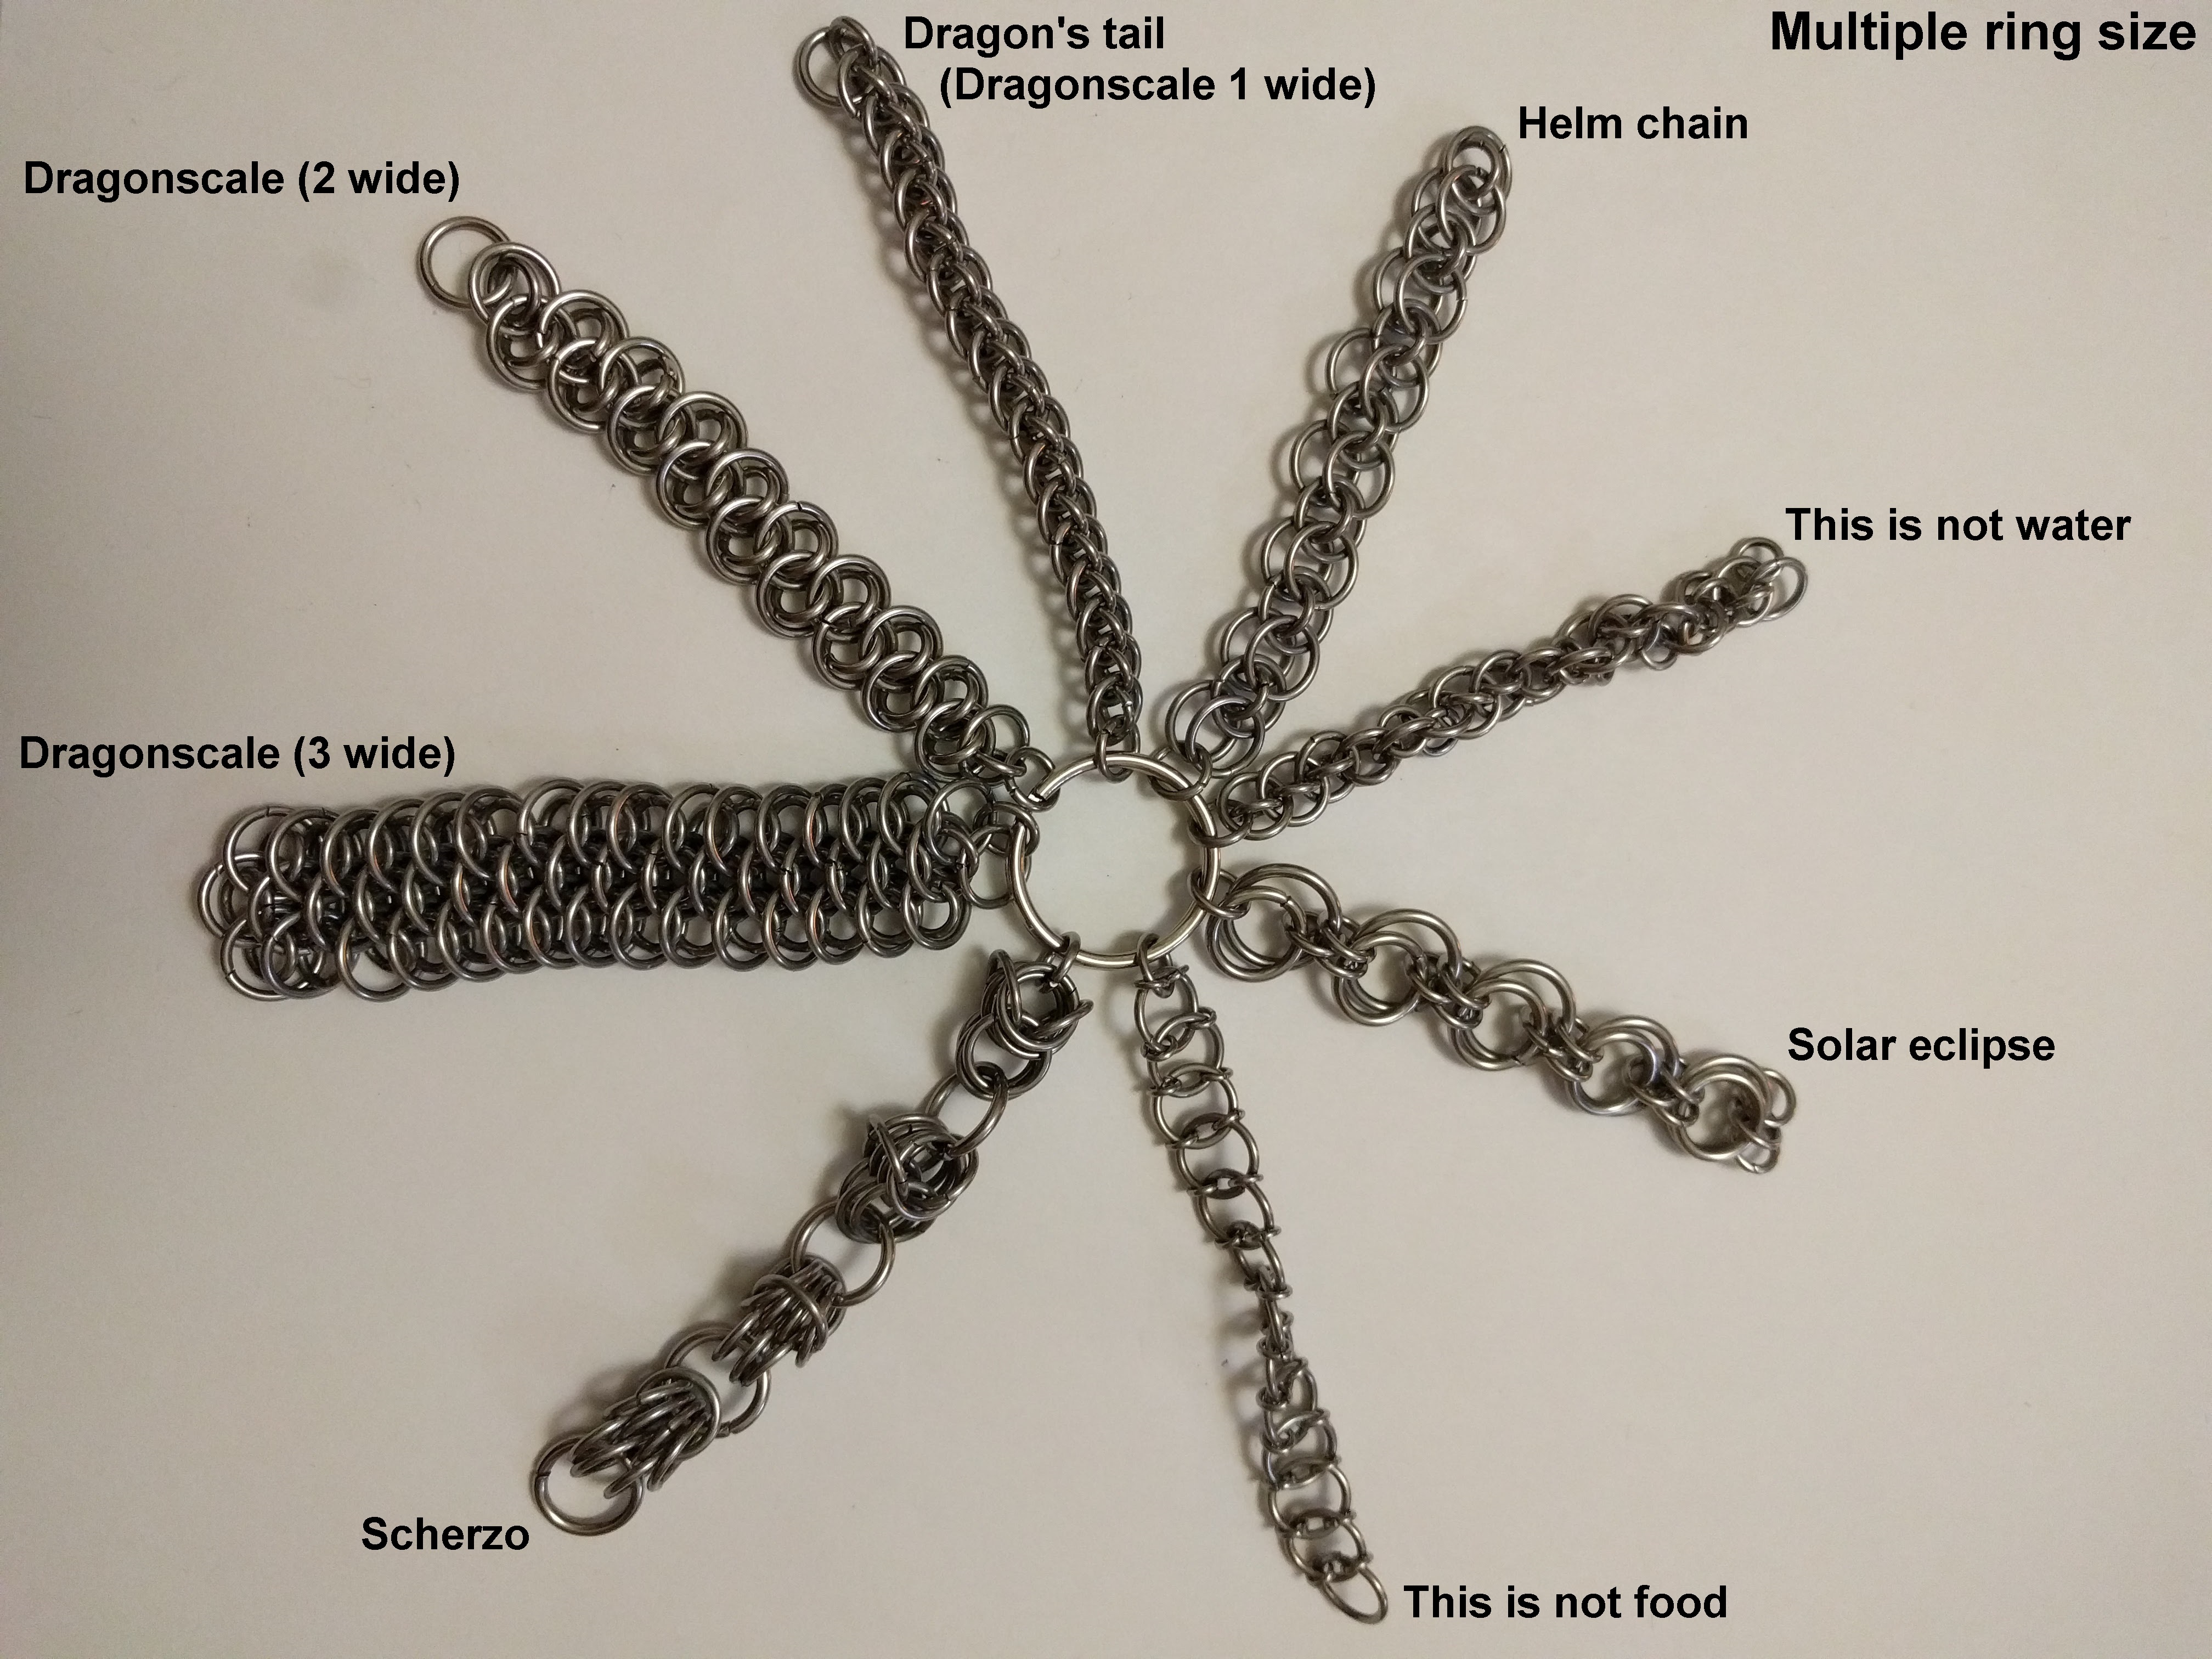 The weaves that use multiple ring sizes connected to a central ring, and spread out on a white surface.